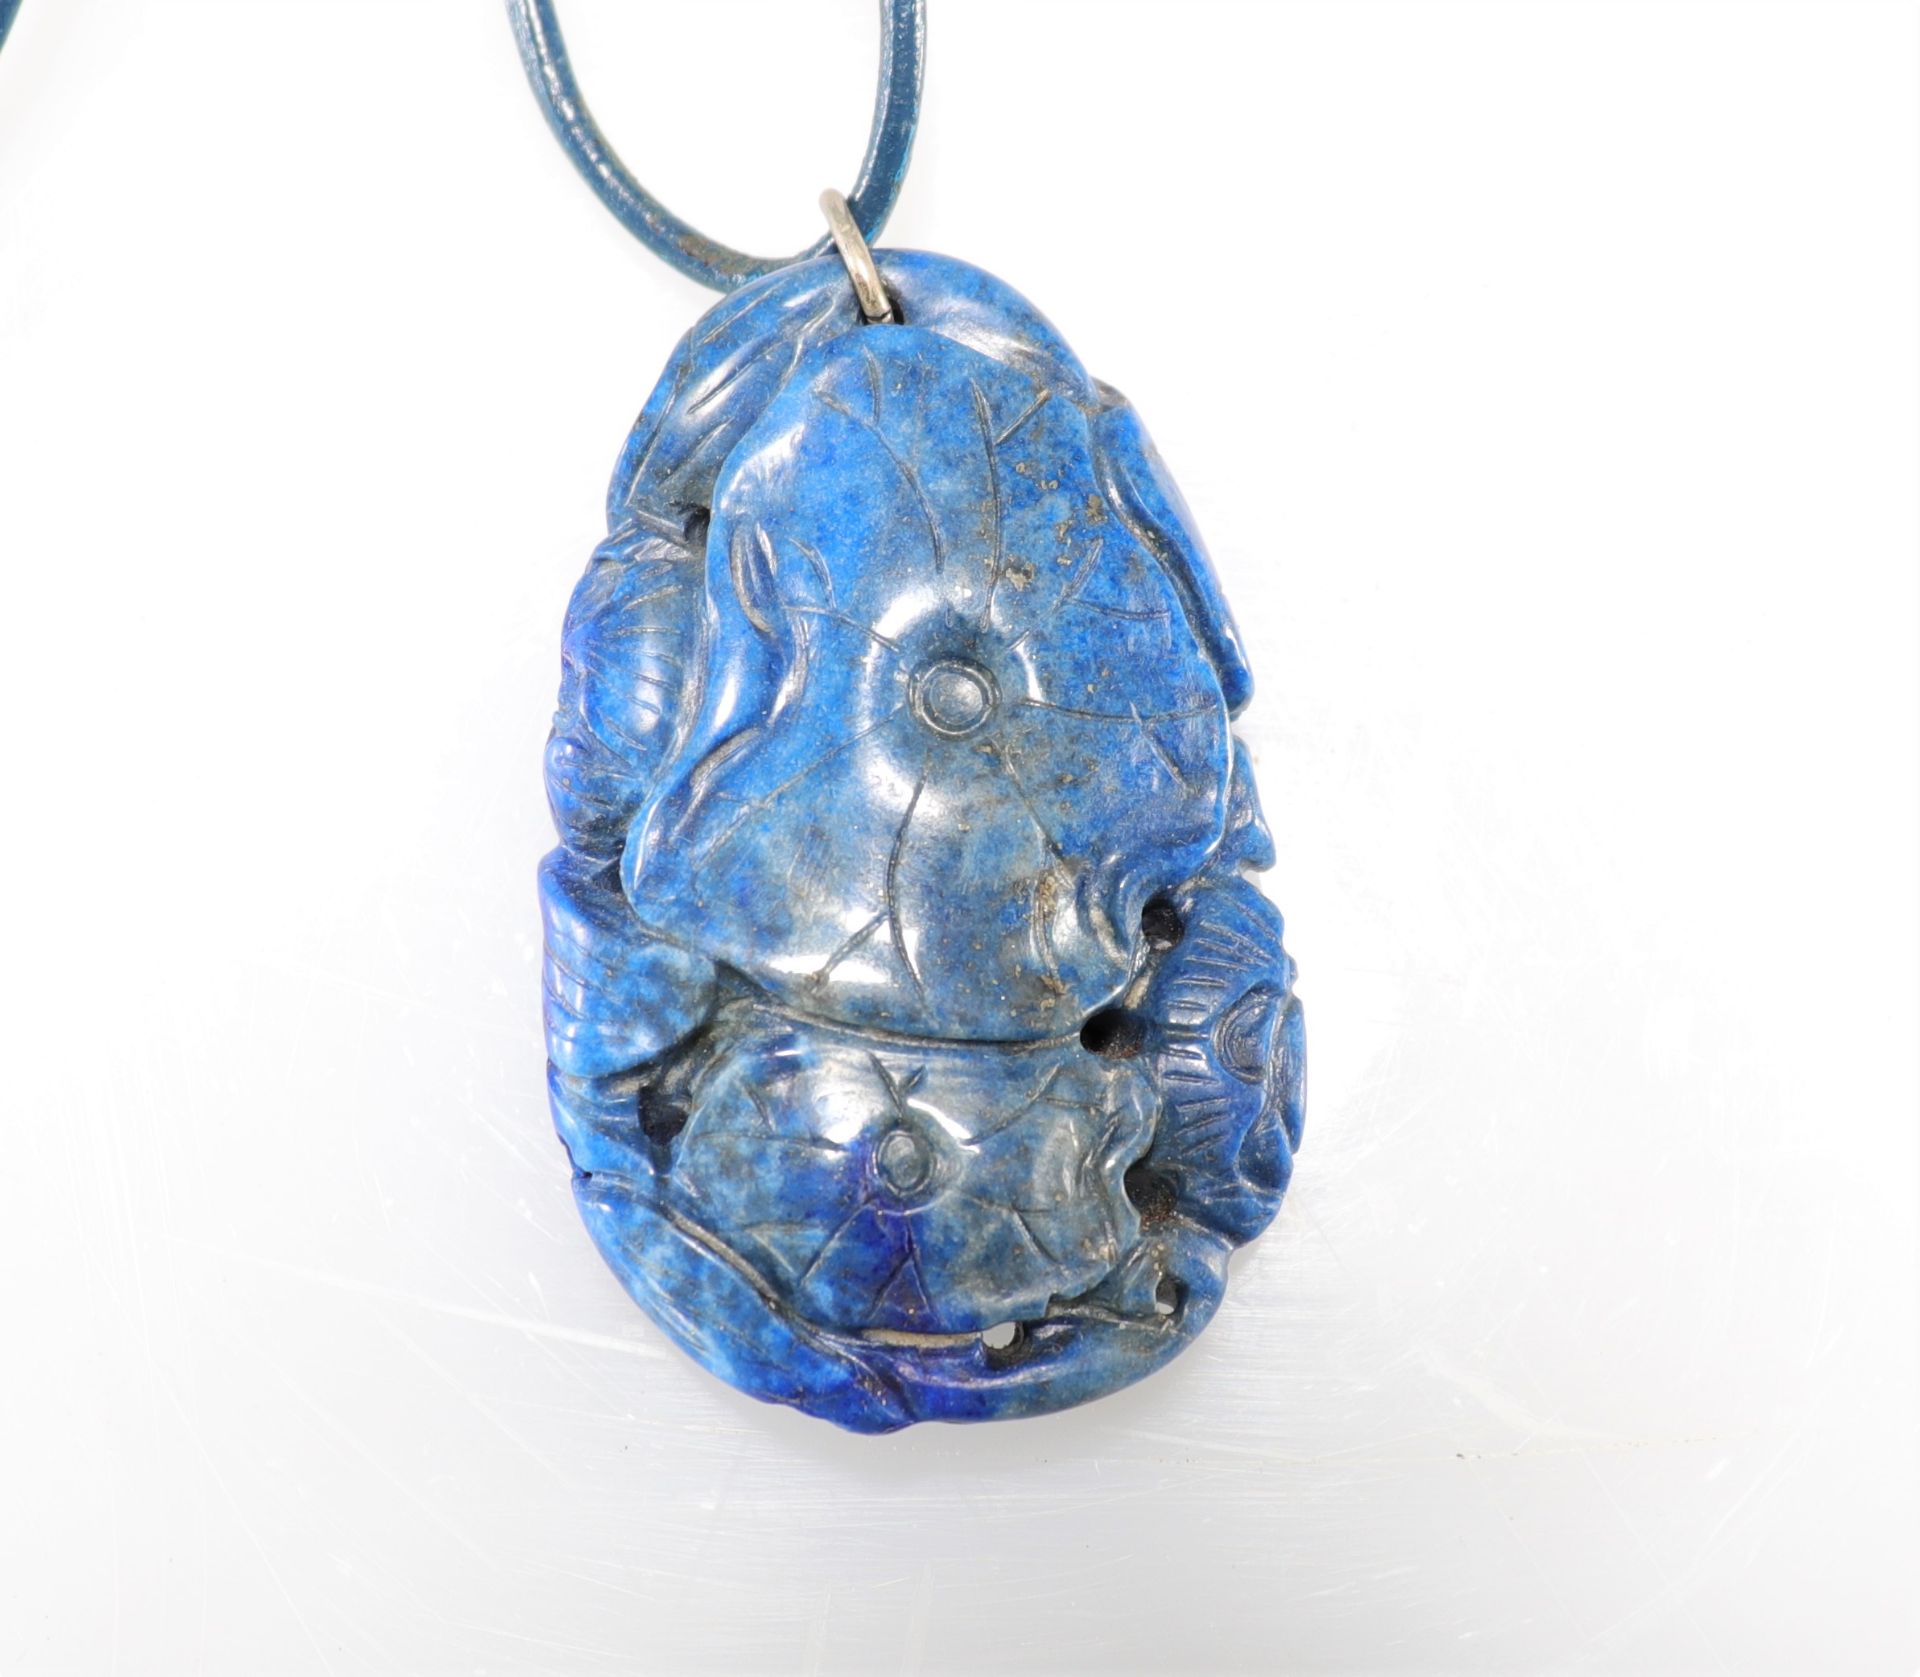 Lapis lazuli pendant carved with fish